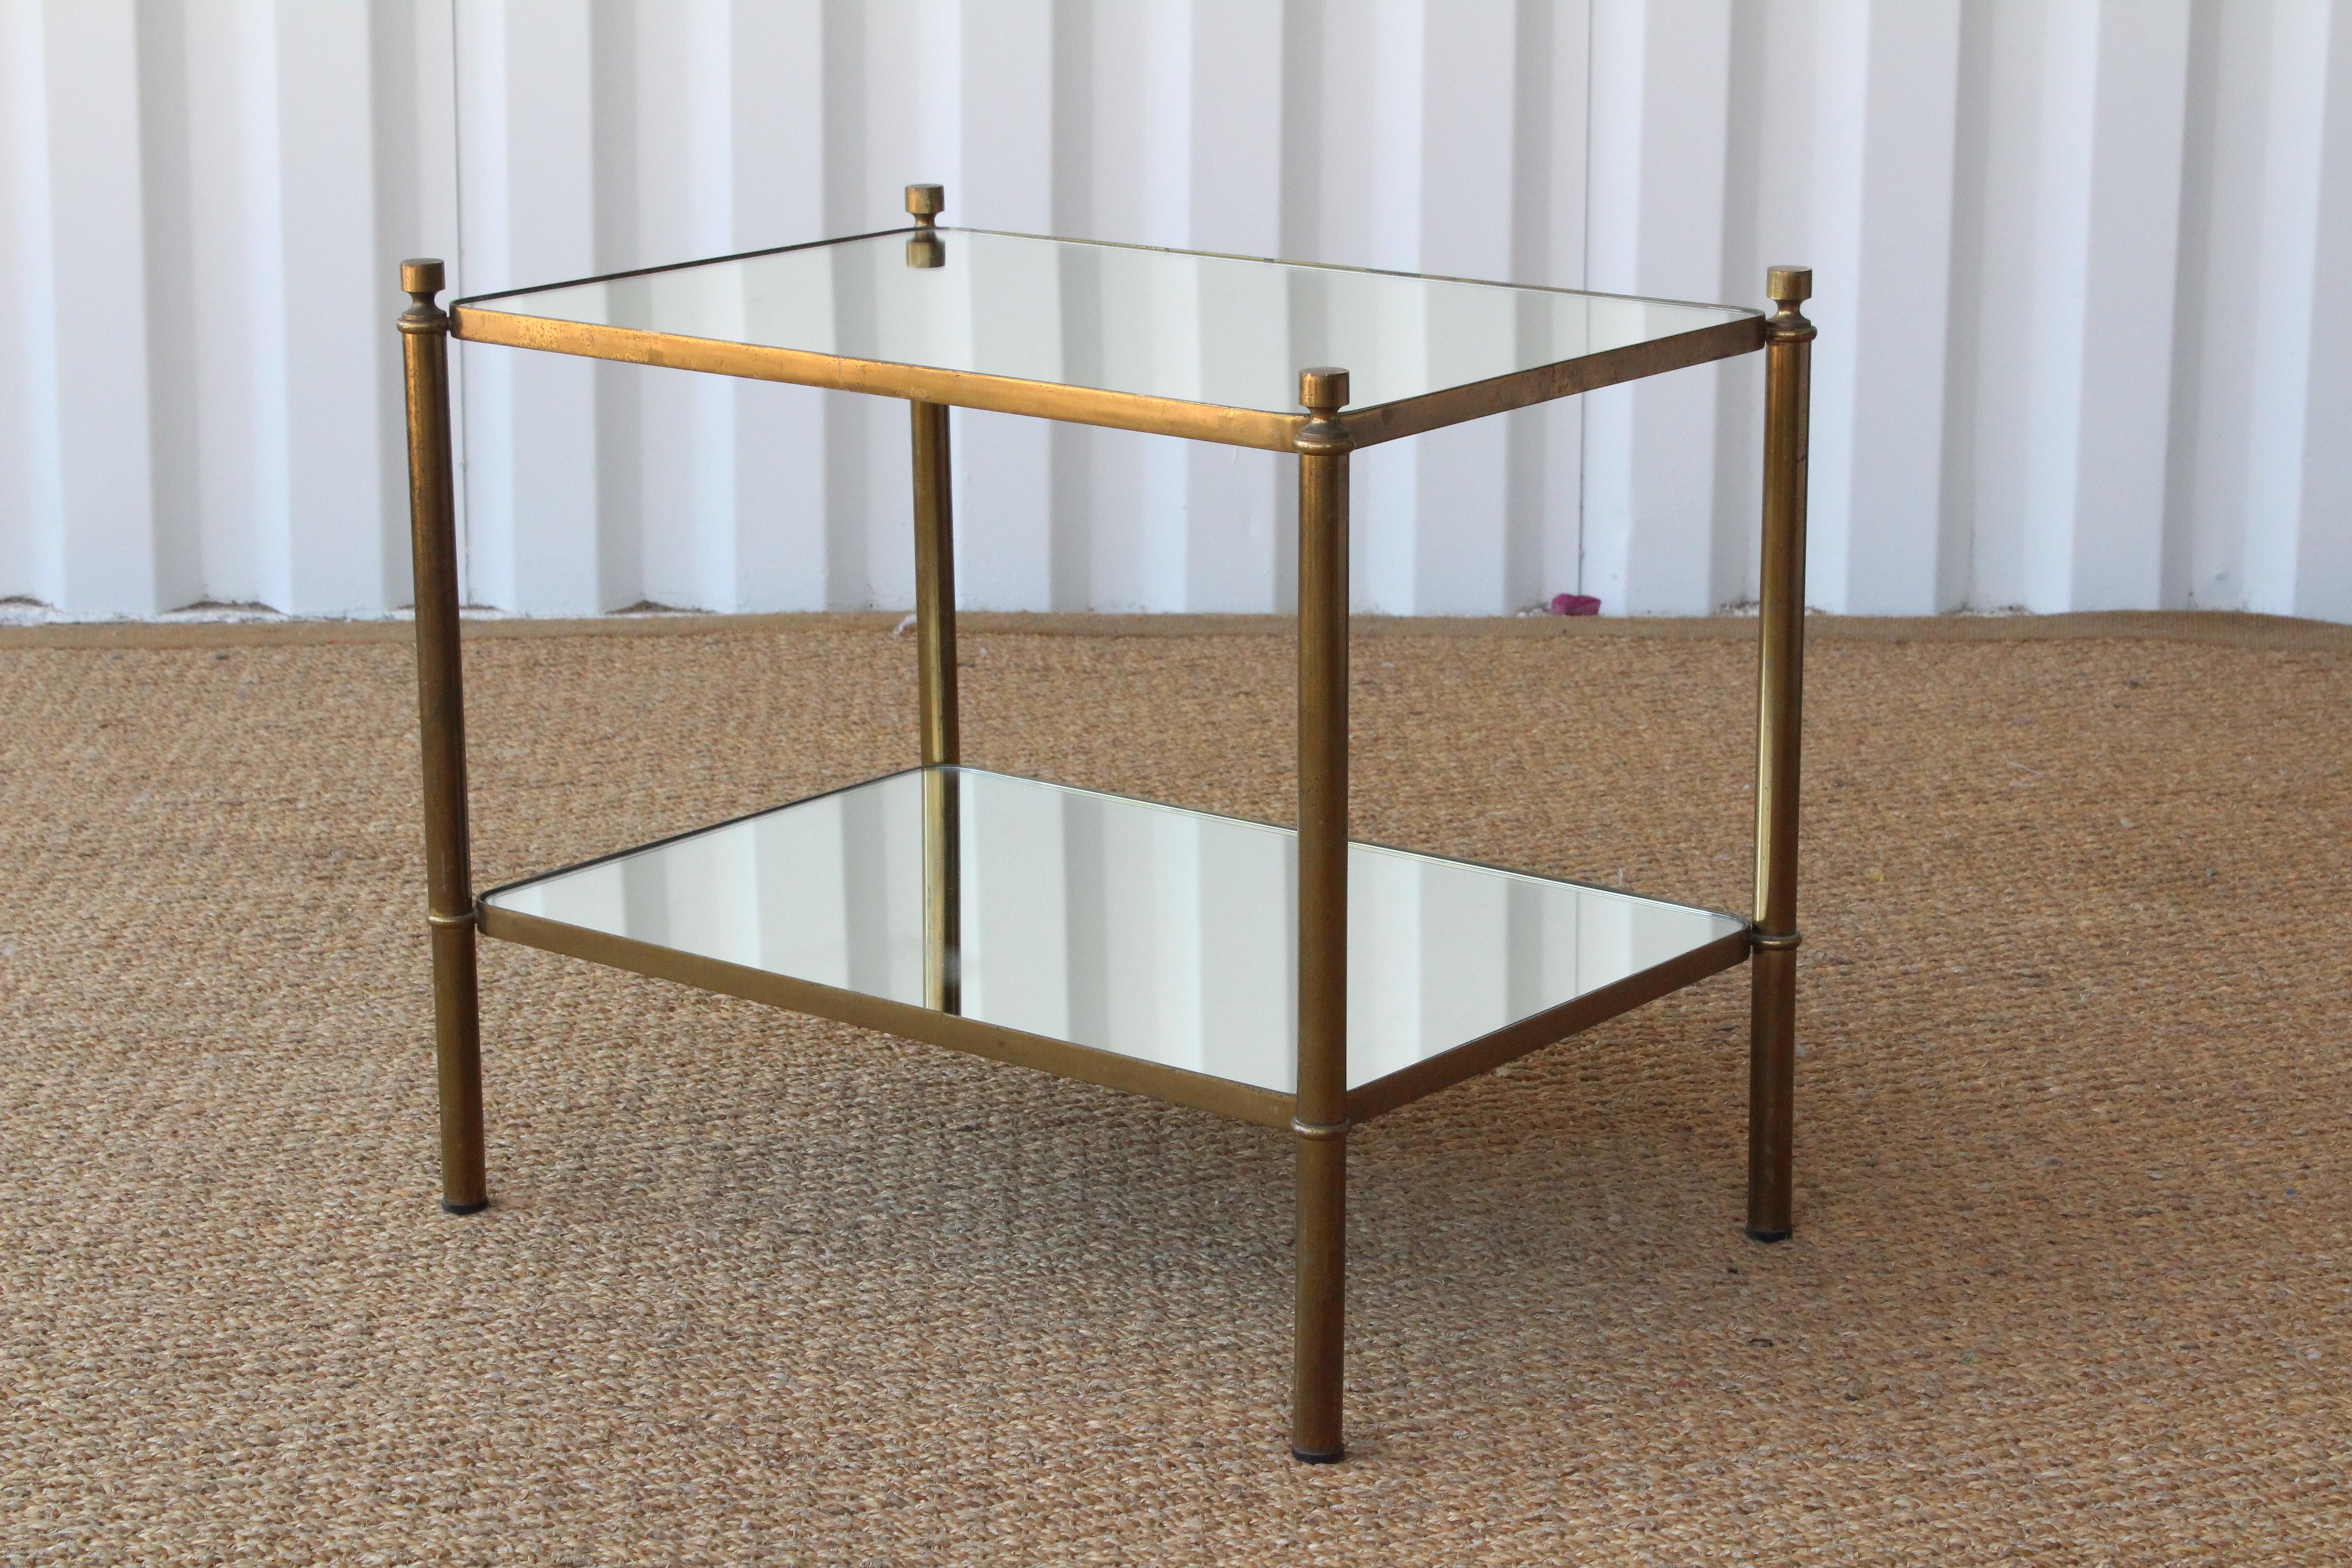 Pair of brass end tables with mirrored shelves, France, 1950s. Brass frames have age appropriate patina. Mirrored tops are new.